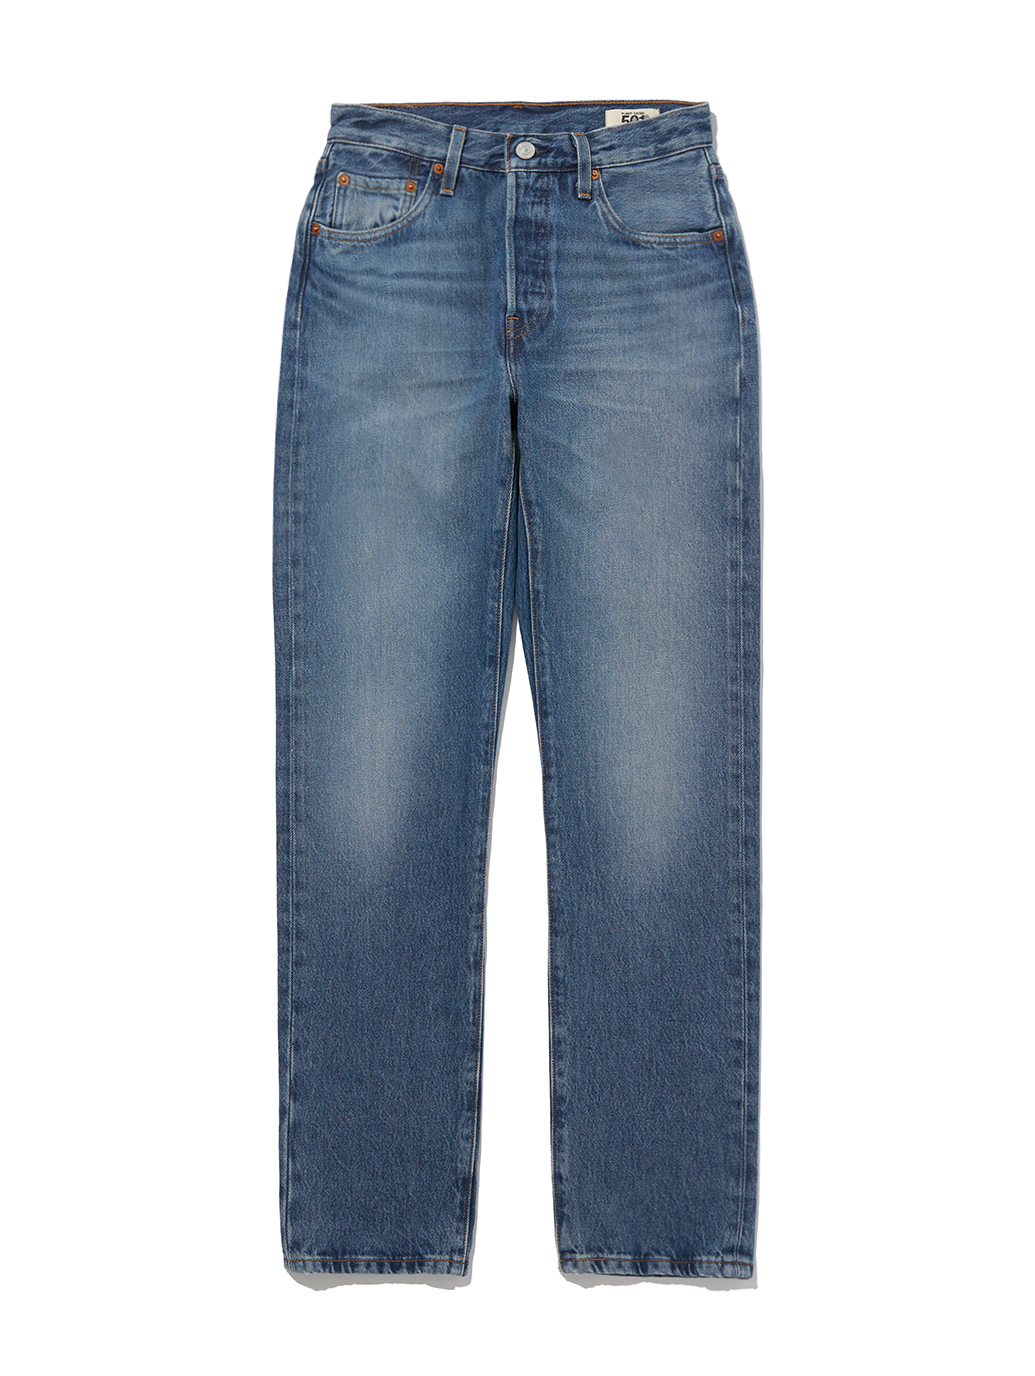 Levi's 501's 150th anniversary model, newly introduced plant-based ...